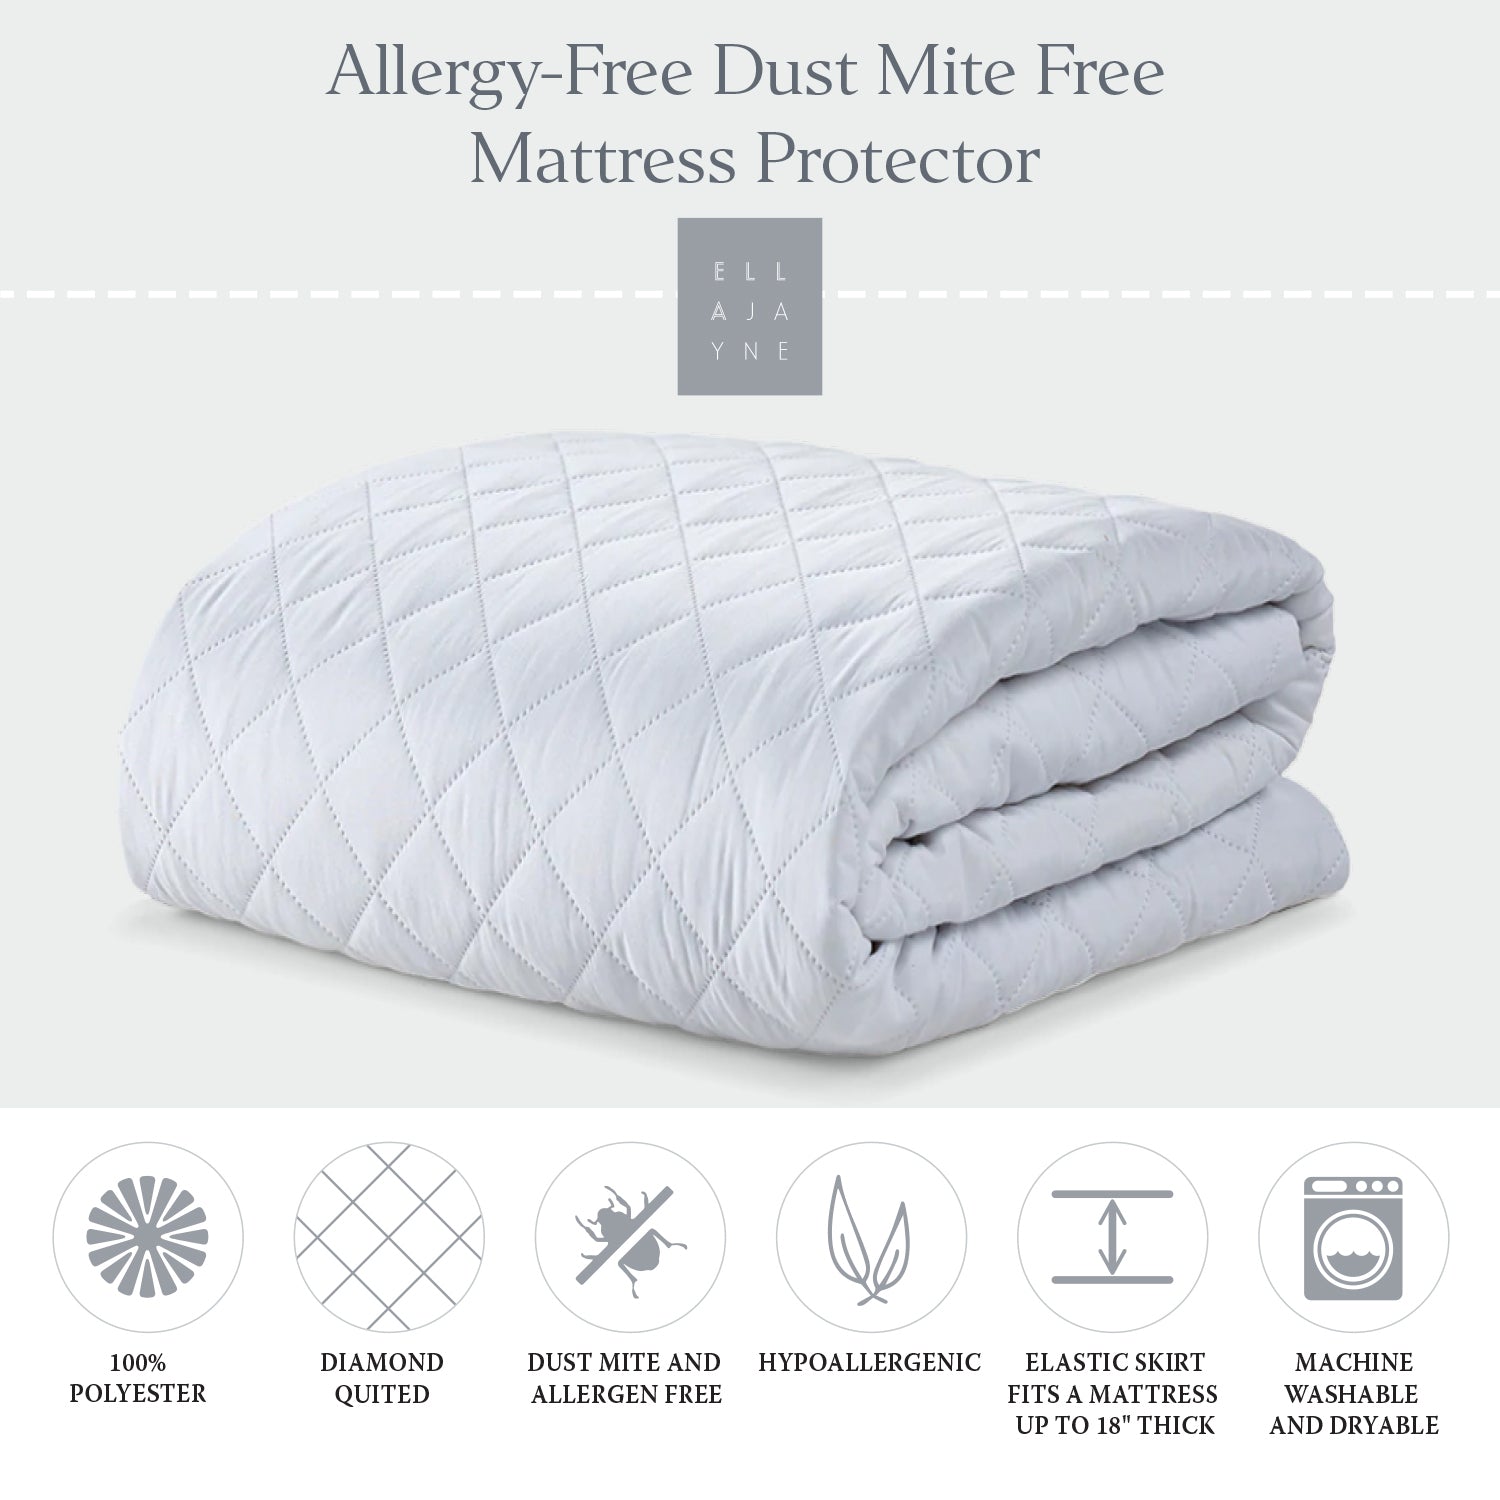 Allergy Free Bundle | Overstuffed Plush Allergy Resistant Gel Filled Side/Back Sleeper Pillow and Allergy-Free Dust Mite Free Mattress Protector